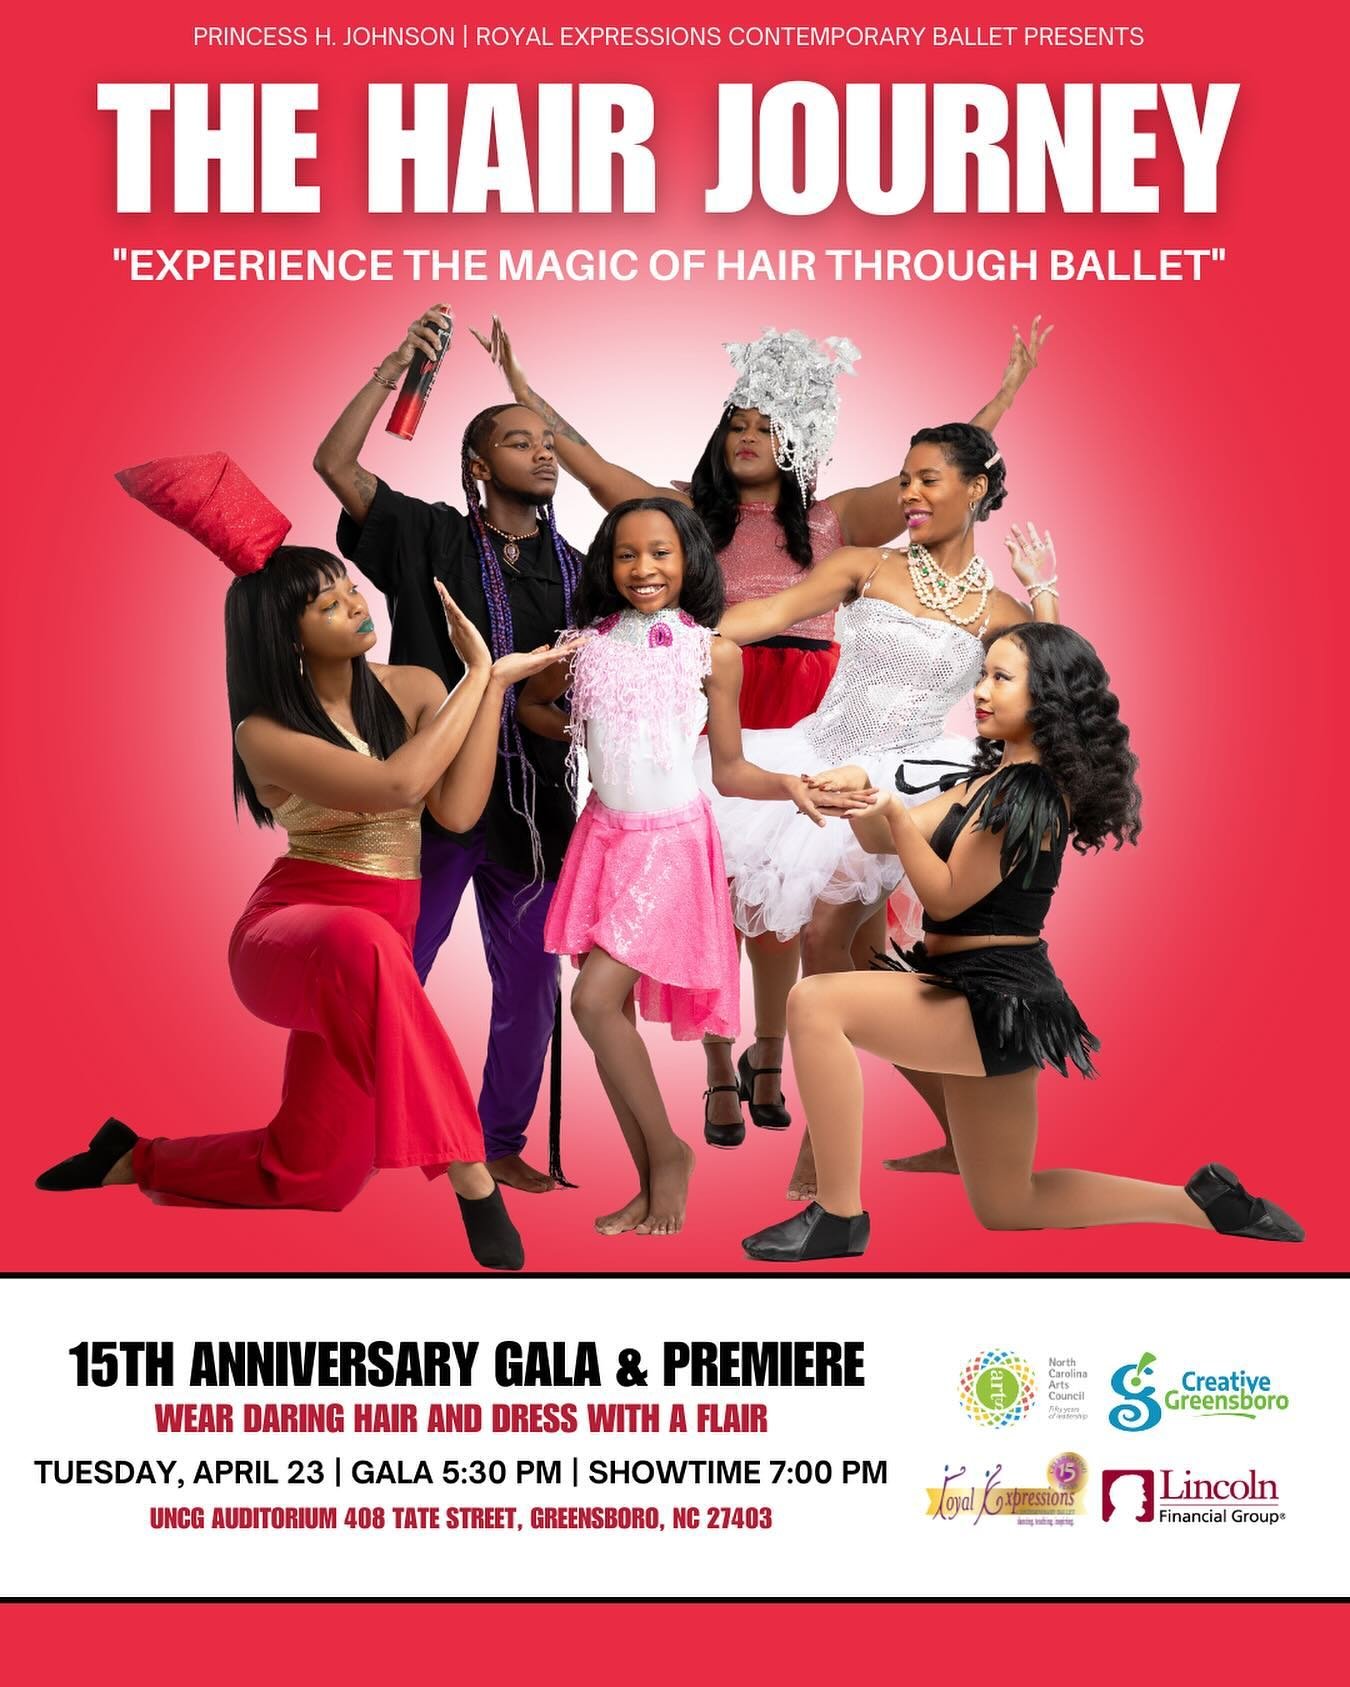 (Greensboro, NC) &ndash; Royal Expressions Contemporary Ballet presents The Hair Journey, an original ballet that celebrates beauty, self-love, and identity through the lens of Black hair.
Adapted from a yet-to-be-published children&rsquo;s book writ